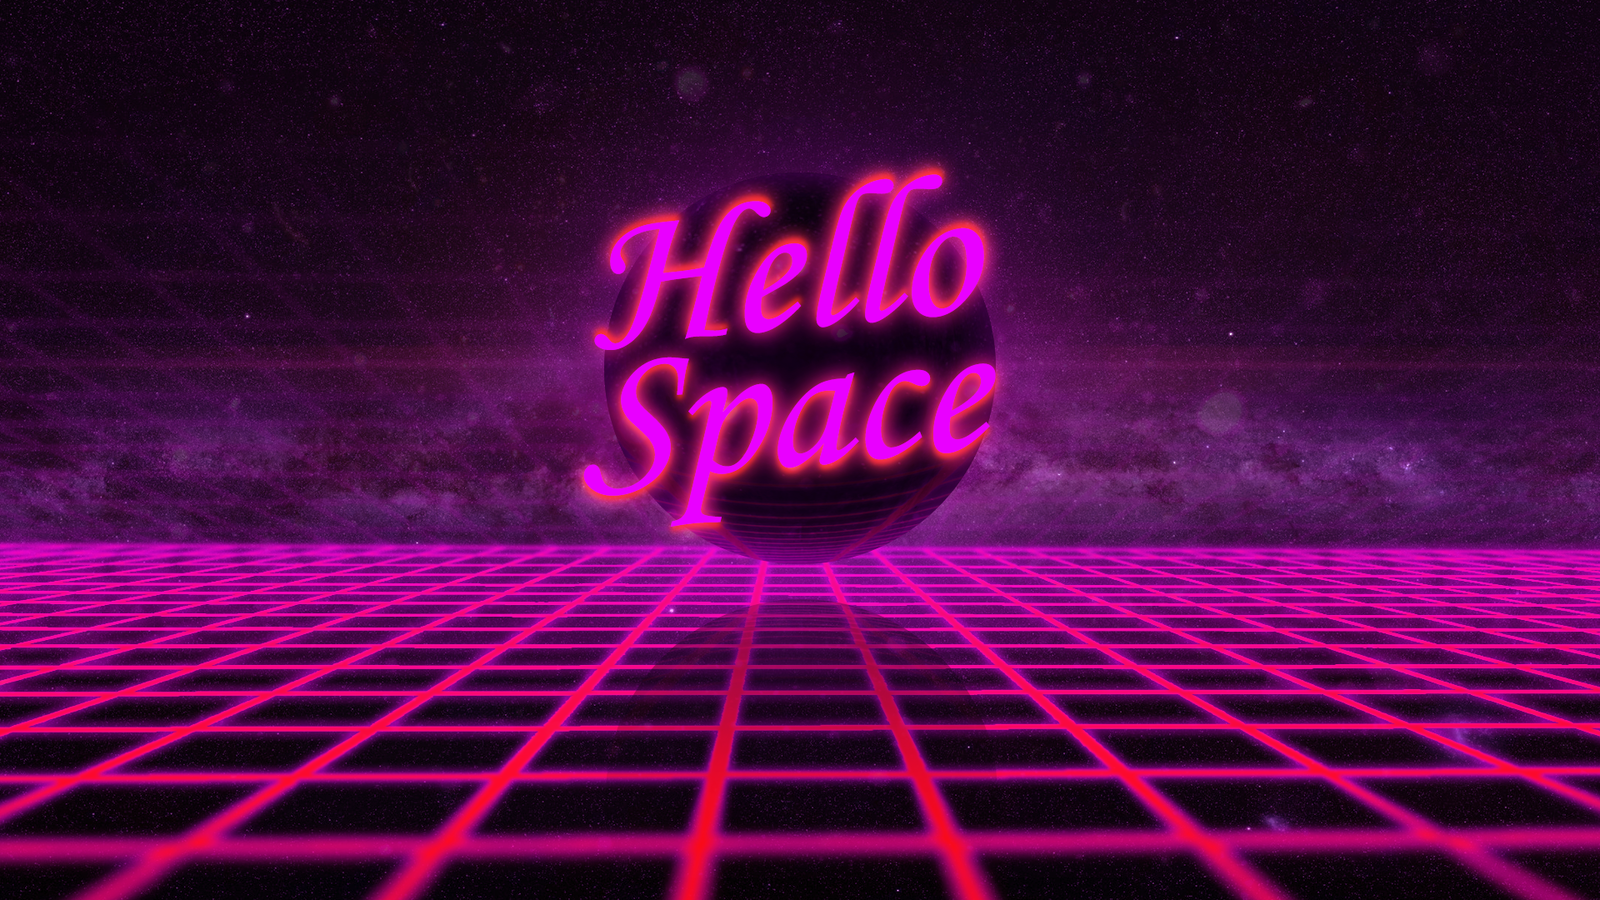 Hello Space - My, Synthwave, Retrowave, Art, Photoshop